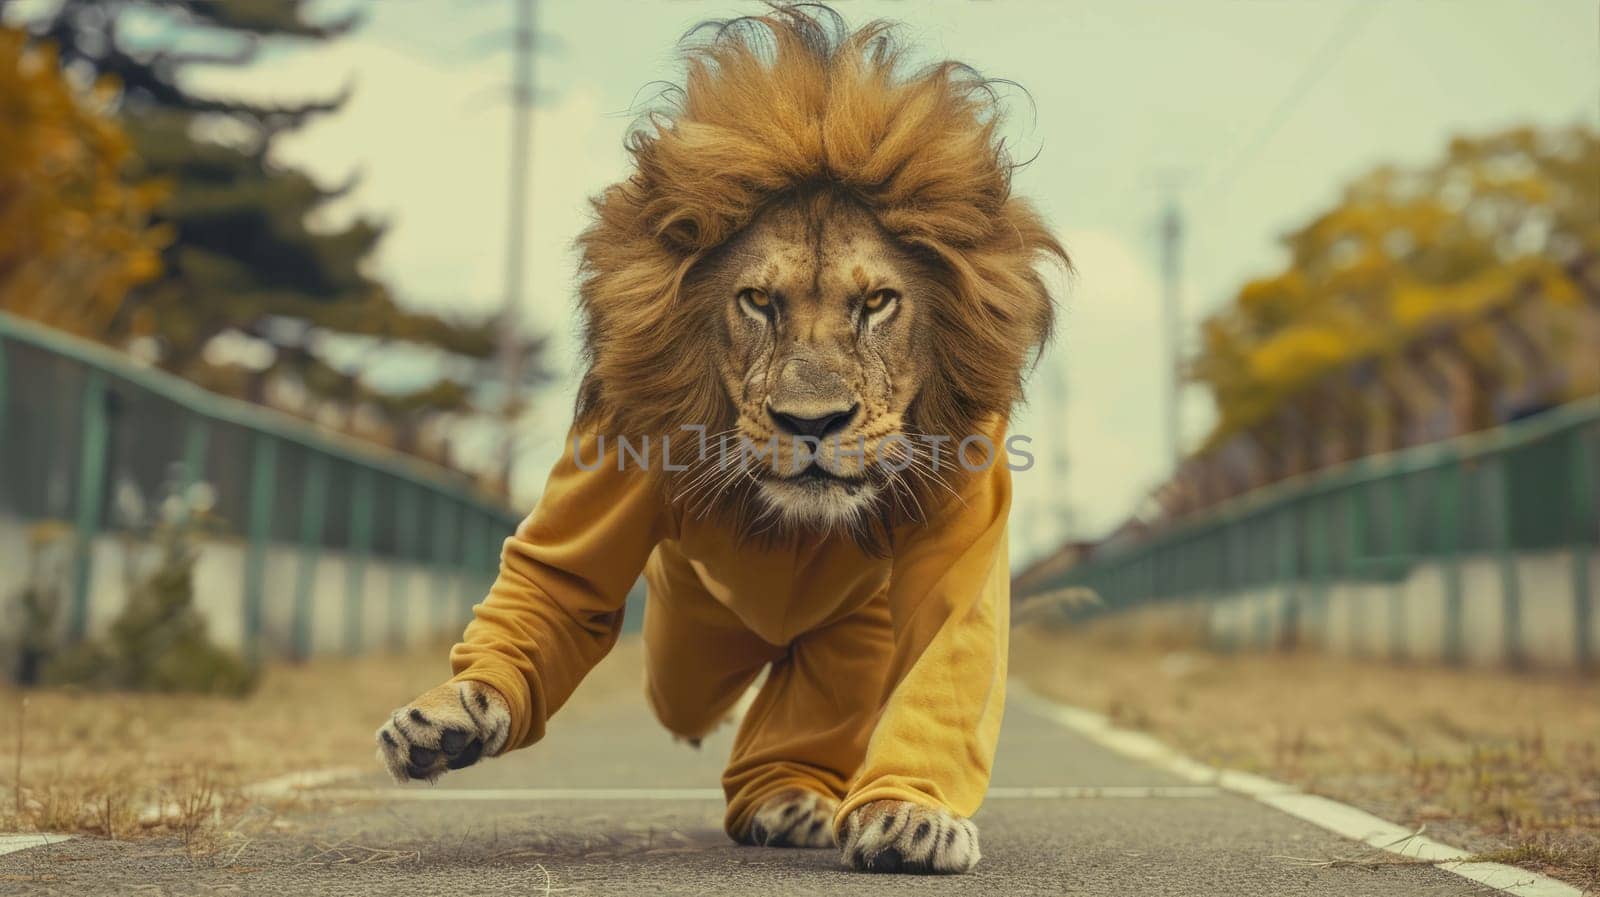 A lion in a yellow prisoner suit escapes from prison along an asphalt road by natali_brill